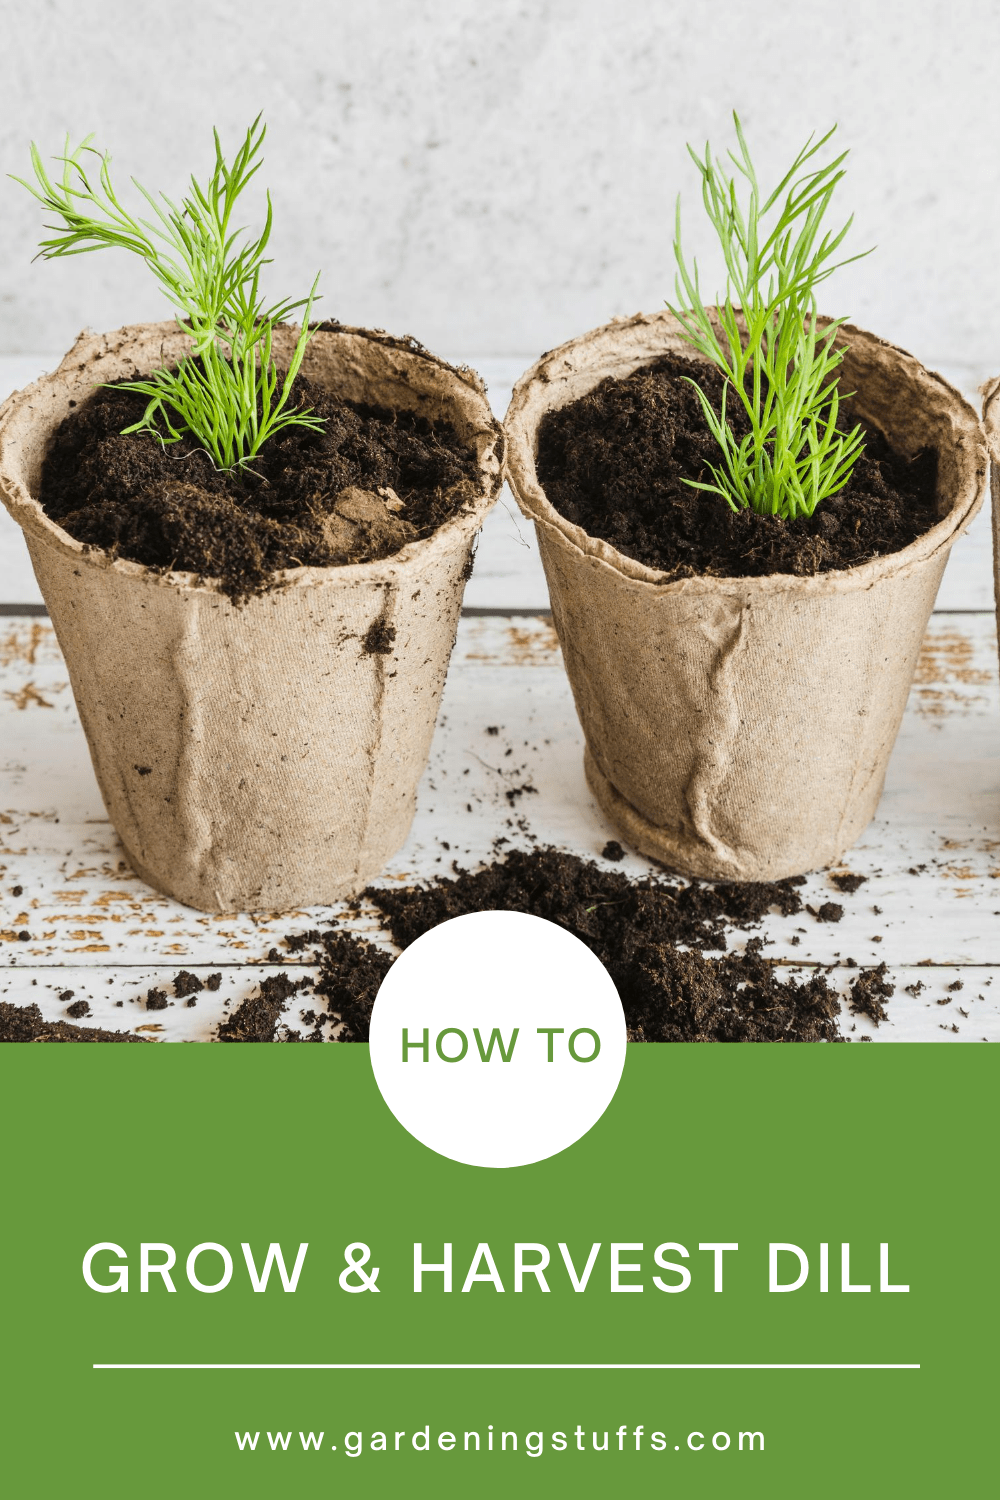 The leaves of dill are herbs while it’s little dry seeds spices up recipes in the kitchen. Trapping the most robust aroma in the dill demands that you have it in your garden. In this guide, we'll teach how to plant, grow, care for, and harvest dill in your own home/garden.